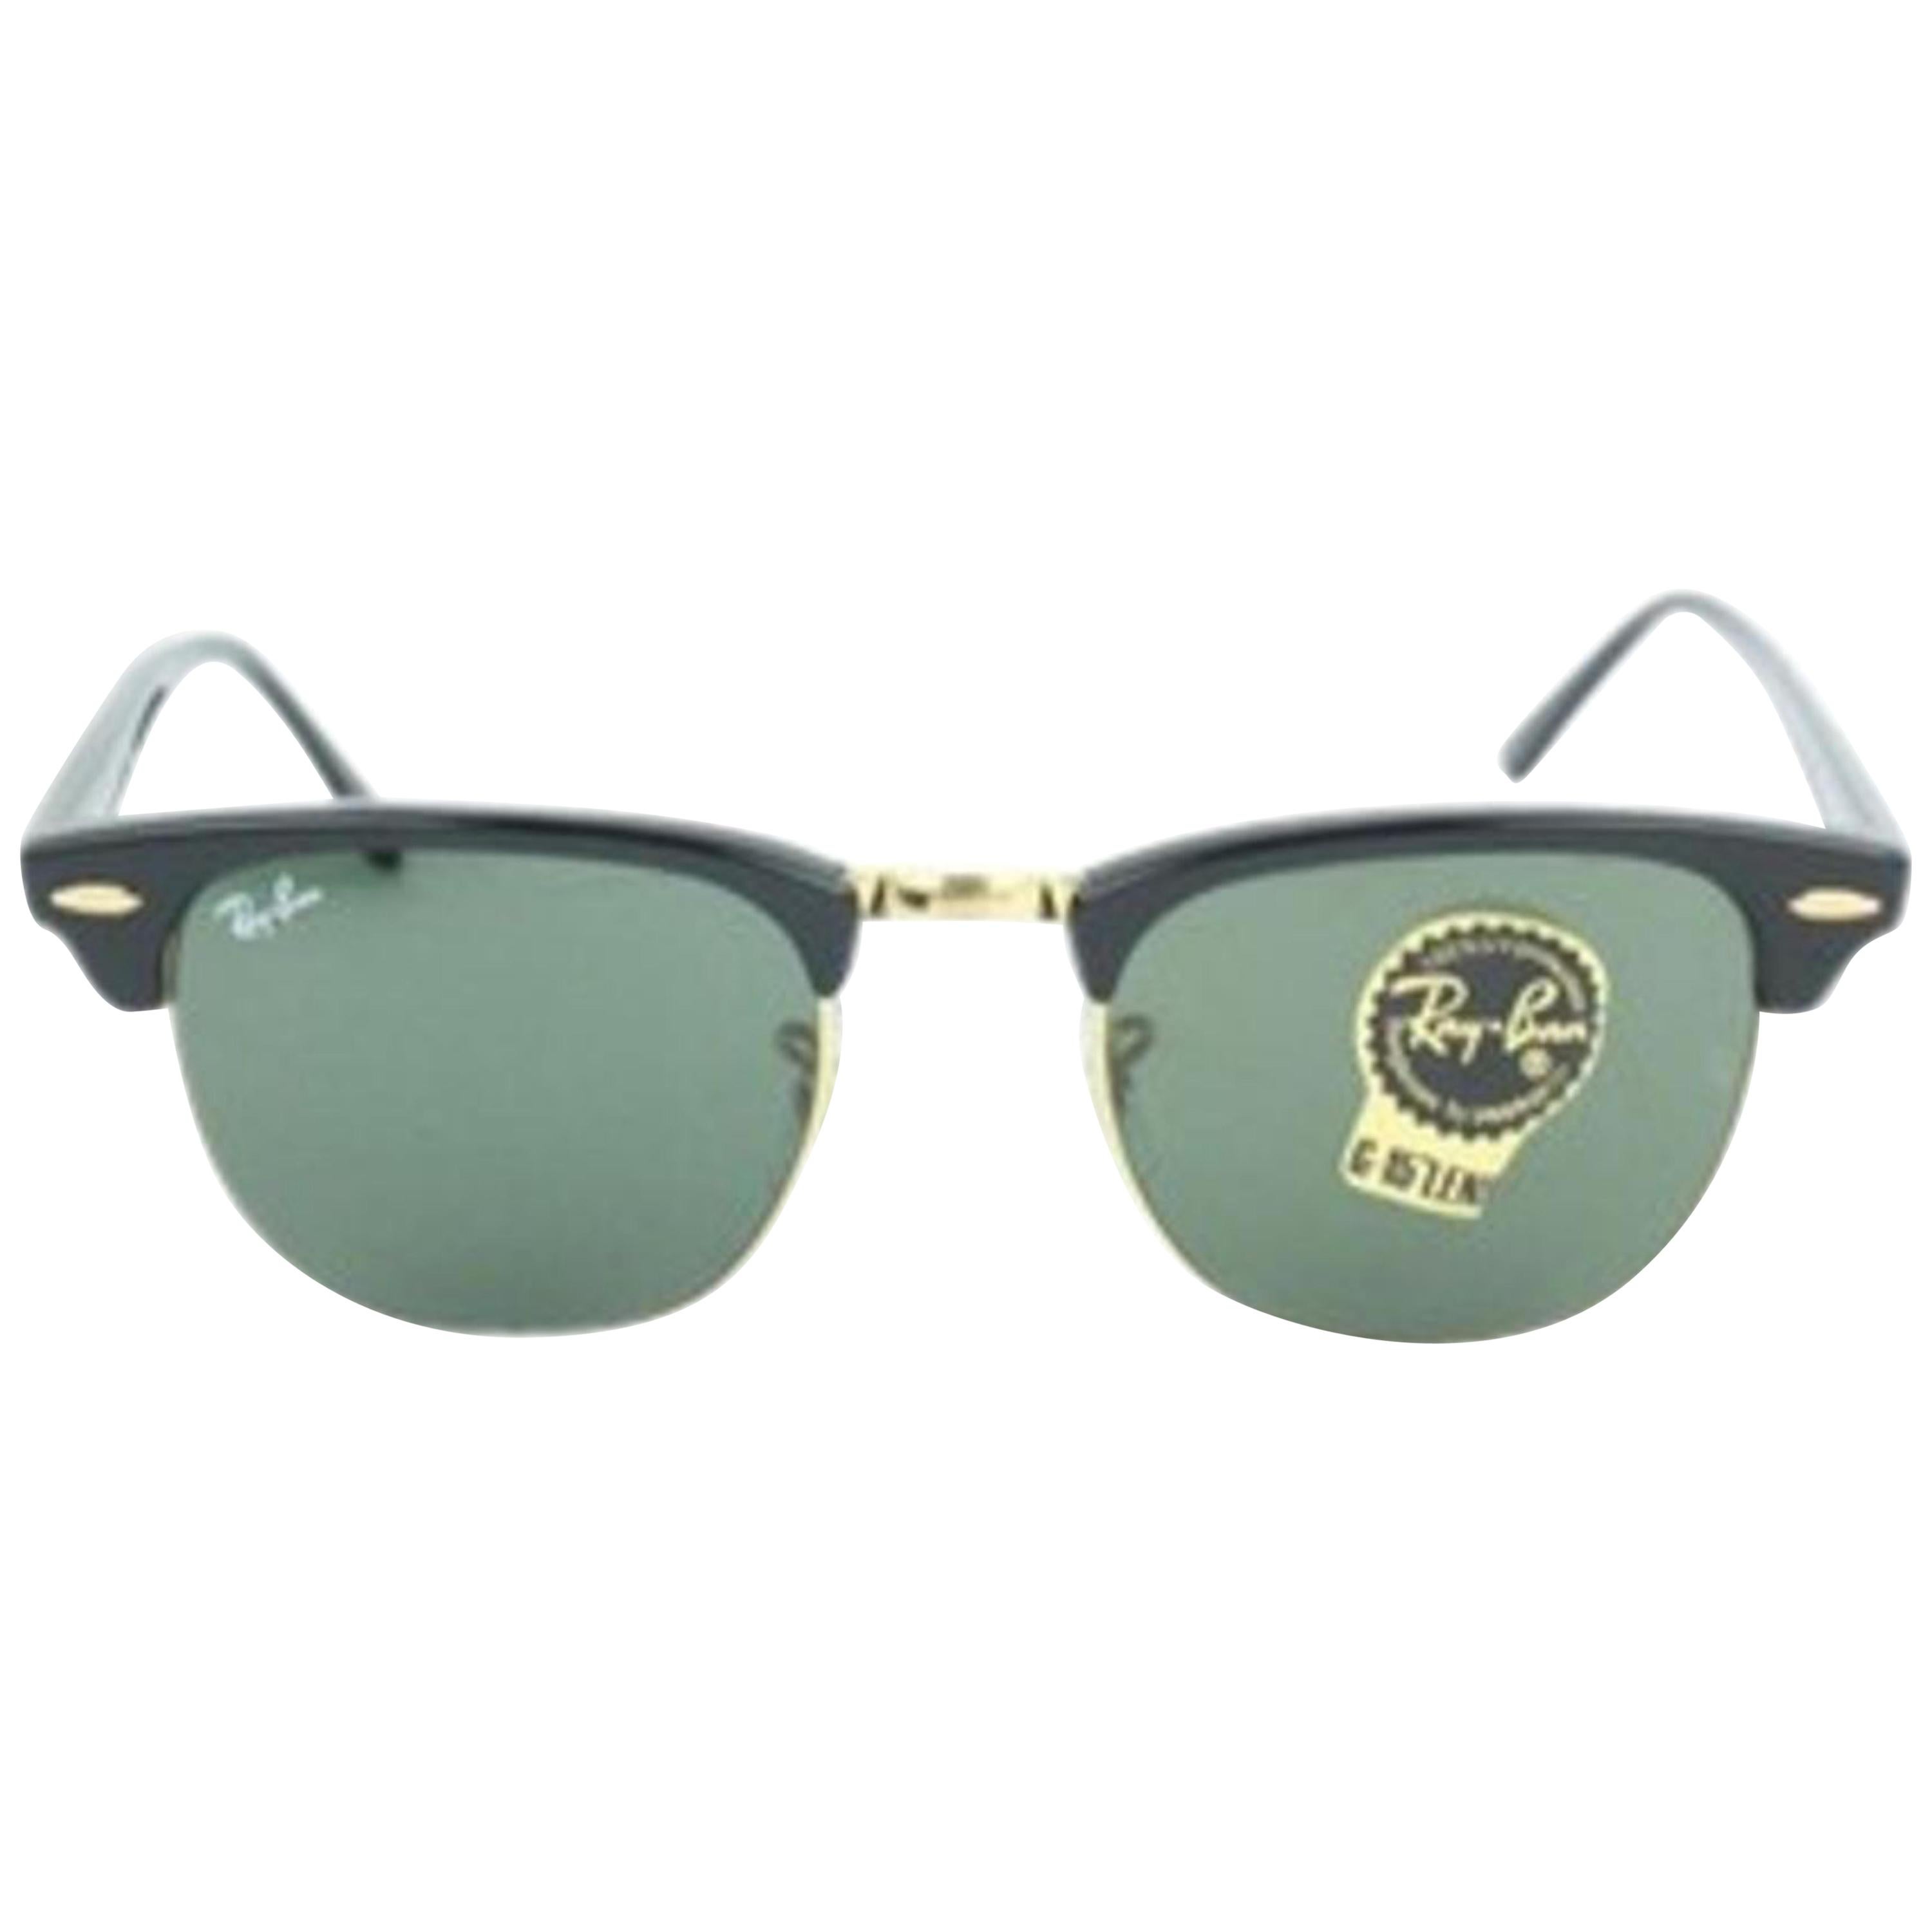 Ray-Ban Black Rb3016 Clubmaster 49 C25mz1019 Sunglasses For Sale